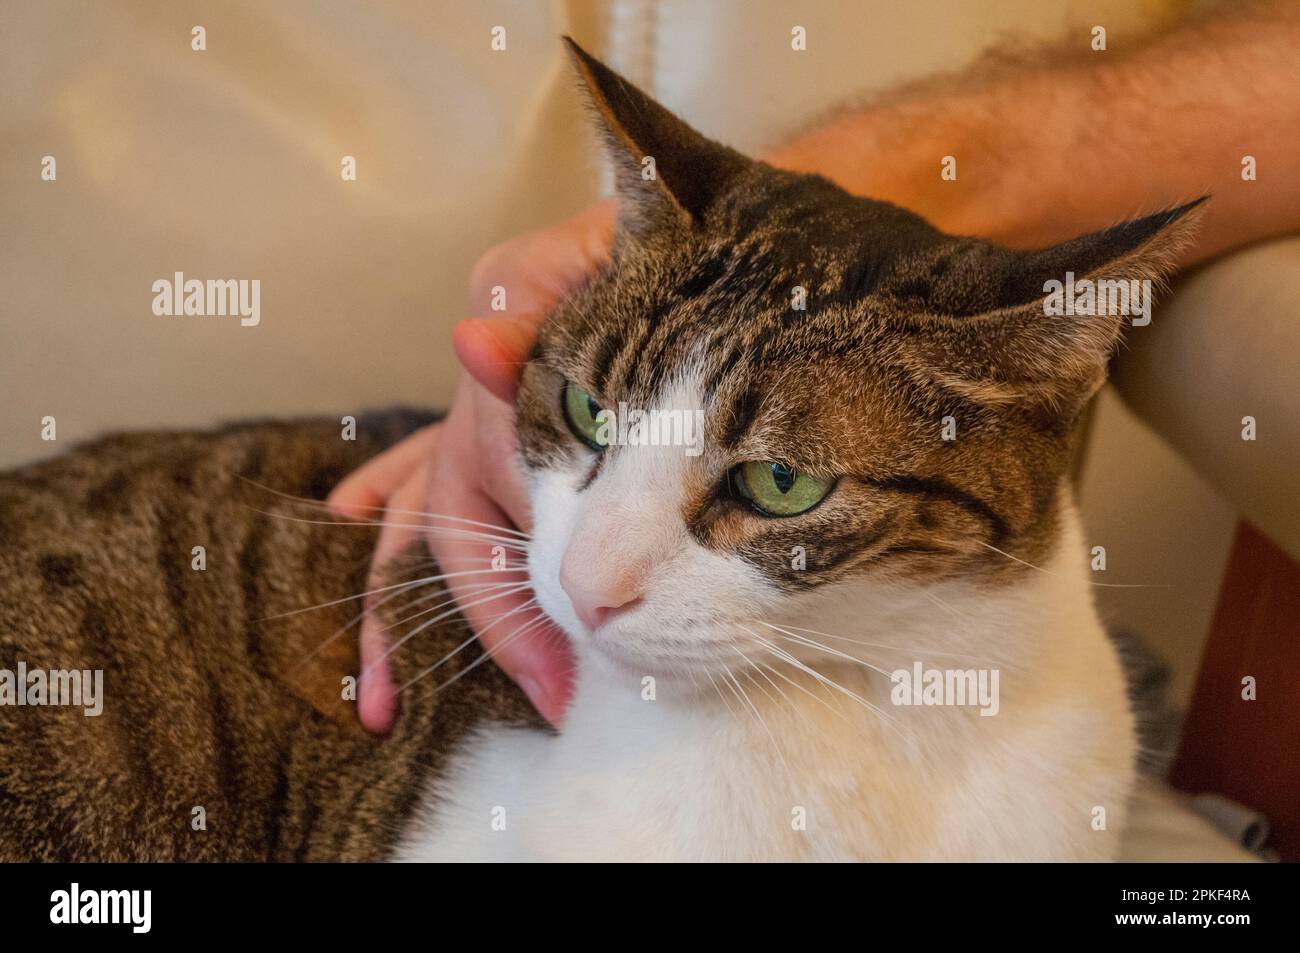 Hand stroking a tabby and white cat. Stock Photo